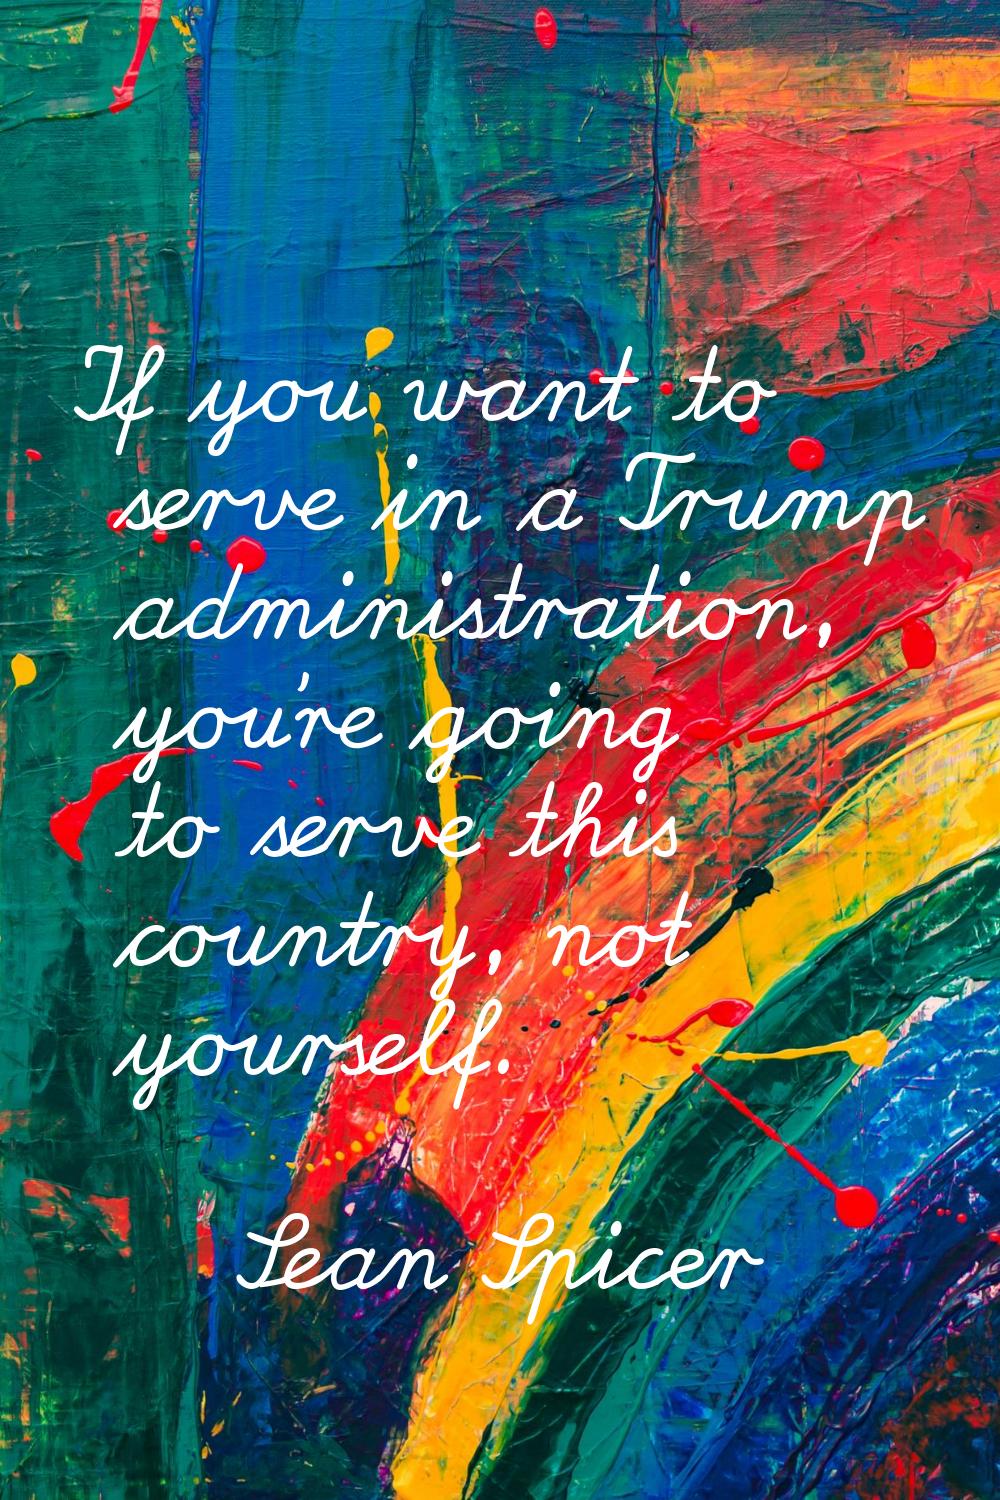 If you want to serve in a Trump administration, you're going to serve this country, not yourself.